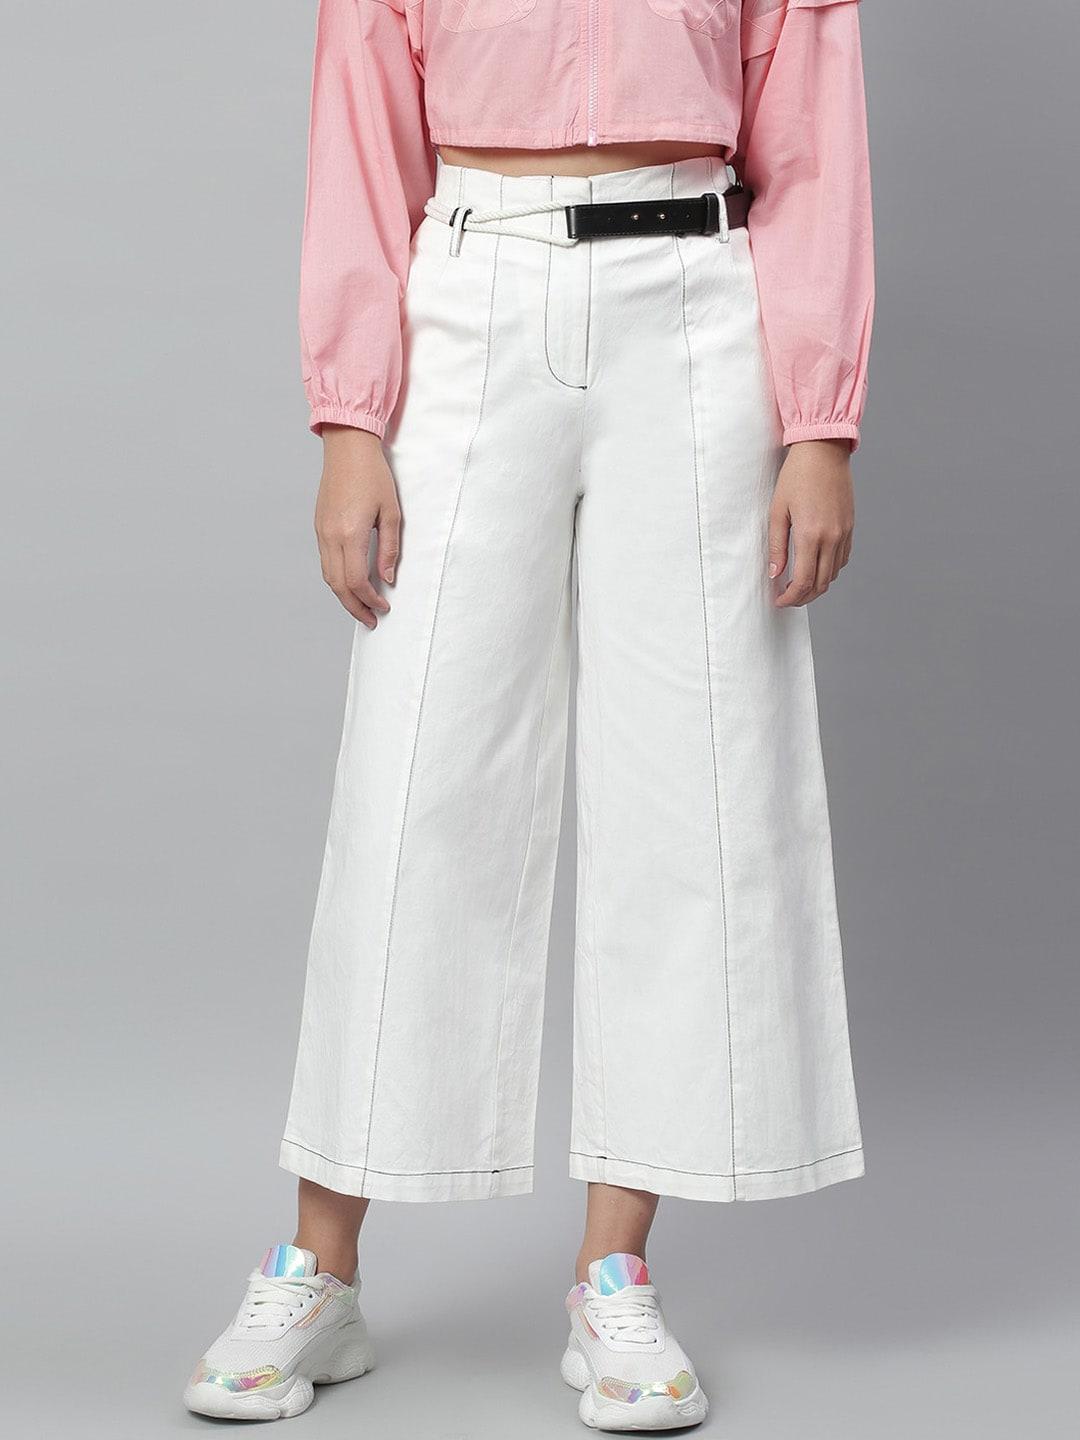 kassually women white solid belted culottes trousers